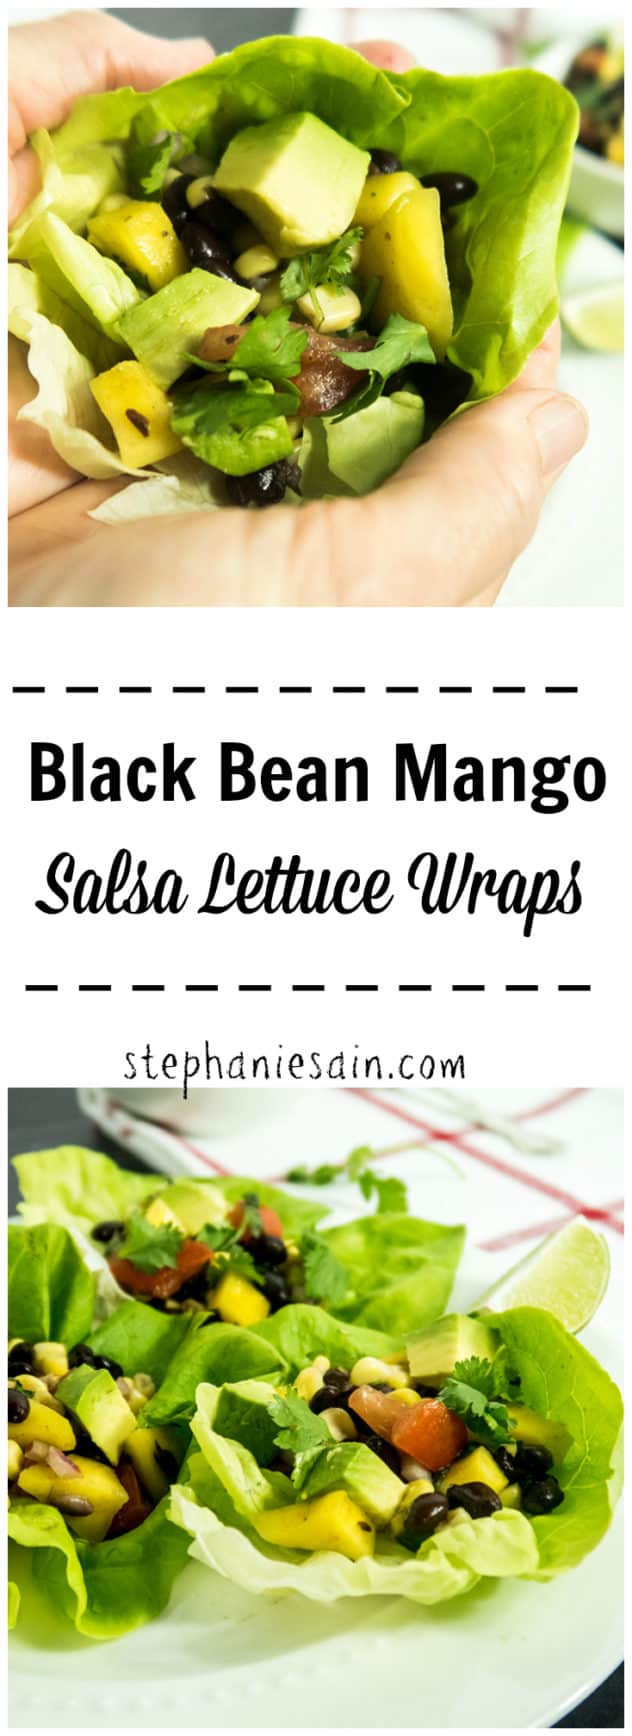 Black Bean Mango Salsa Lettuce Wraps are the perfect go to lunch or dinner for the warmer months. No stove required, fun, and family friendly. Vegan & Gluten Free.